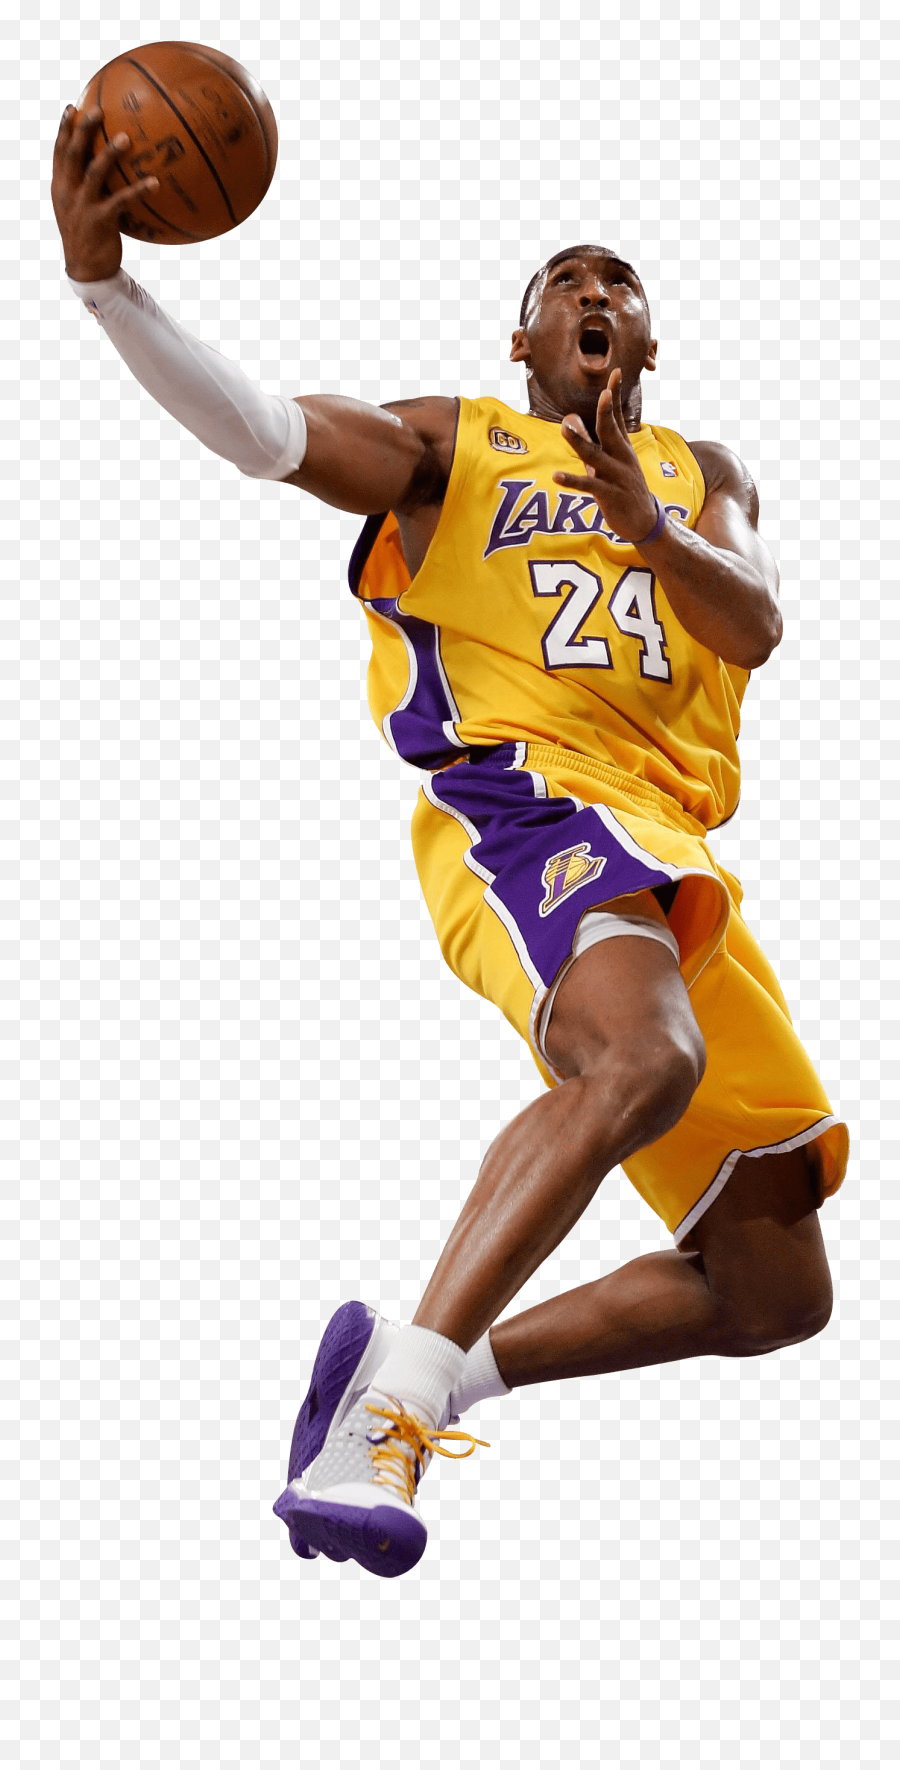 Kobe Bryant Png Hd Pictures - Vhvrs Kobe Bryant Png Hd,Transparent Pictures